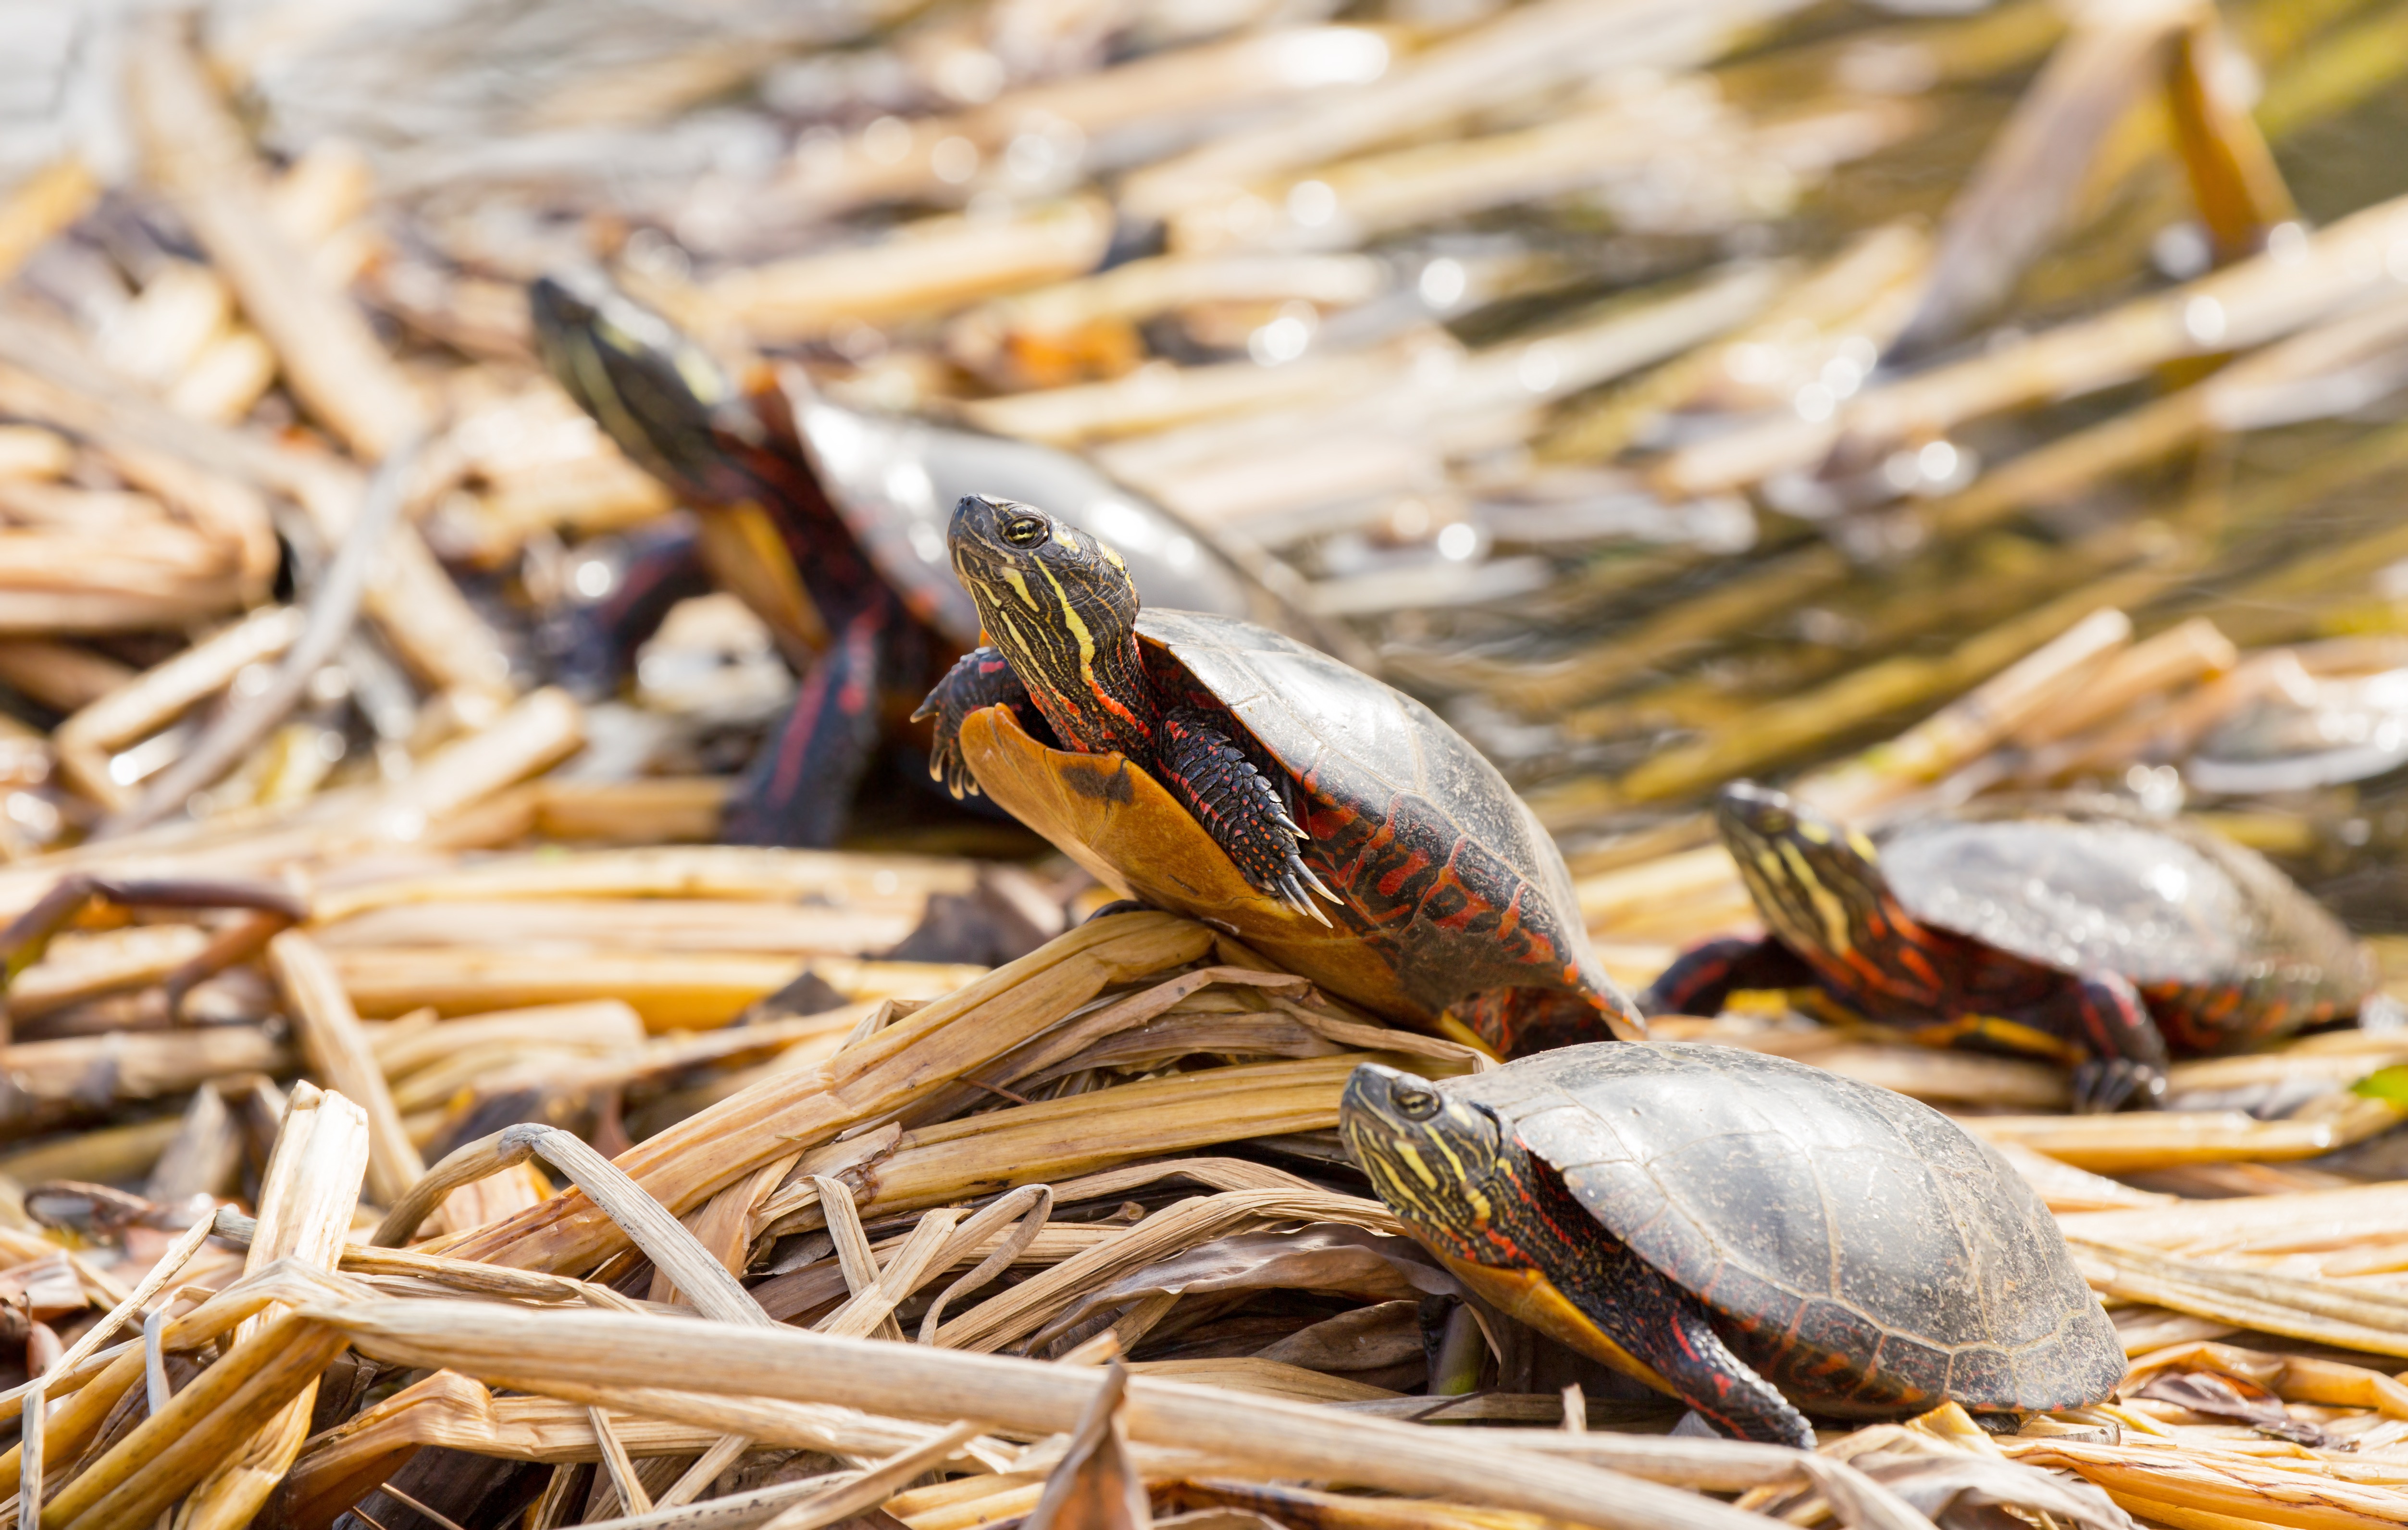 Eastern painted turtles are basking in the sun.